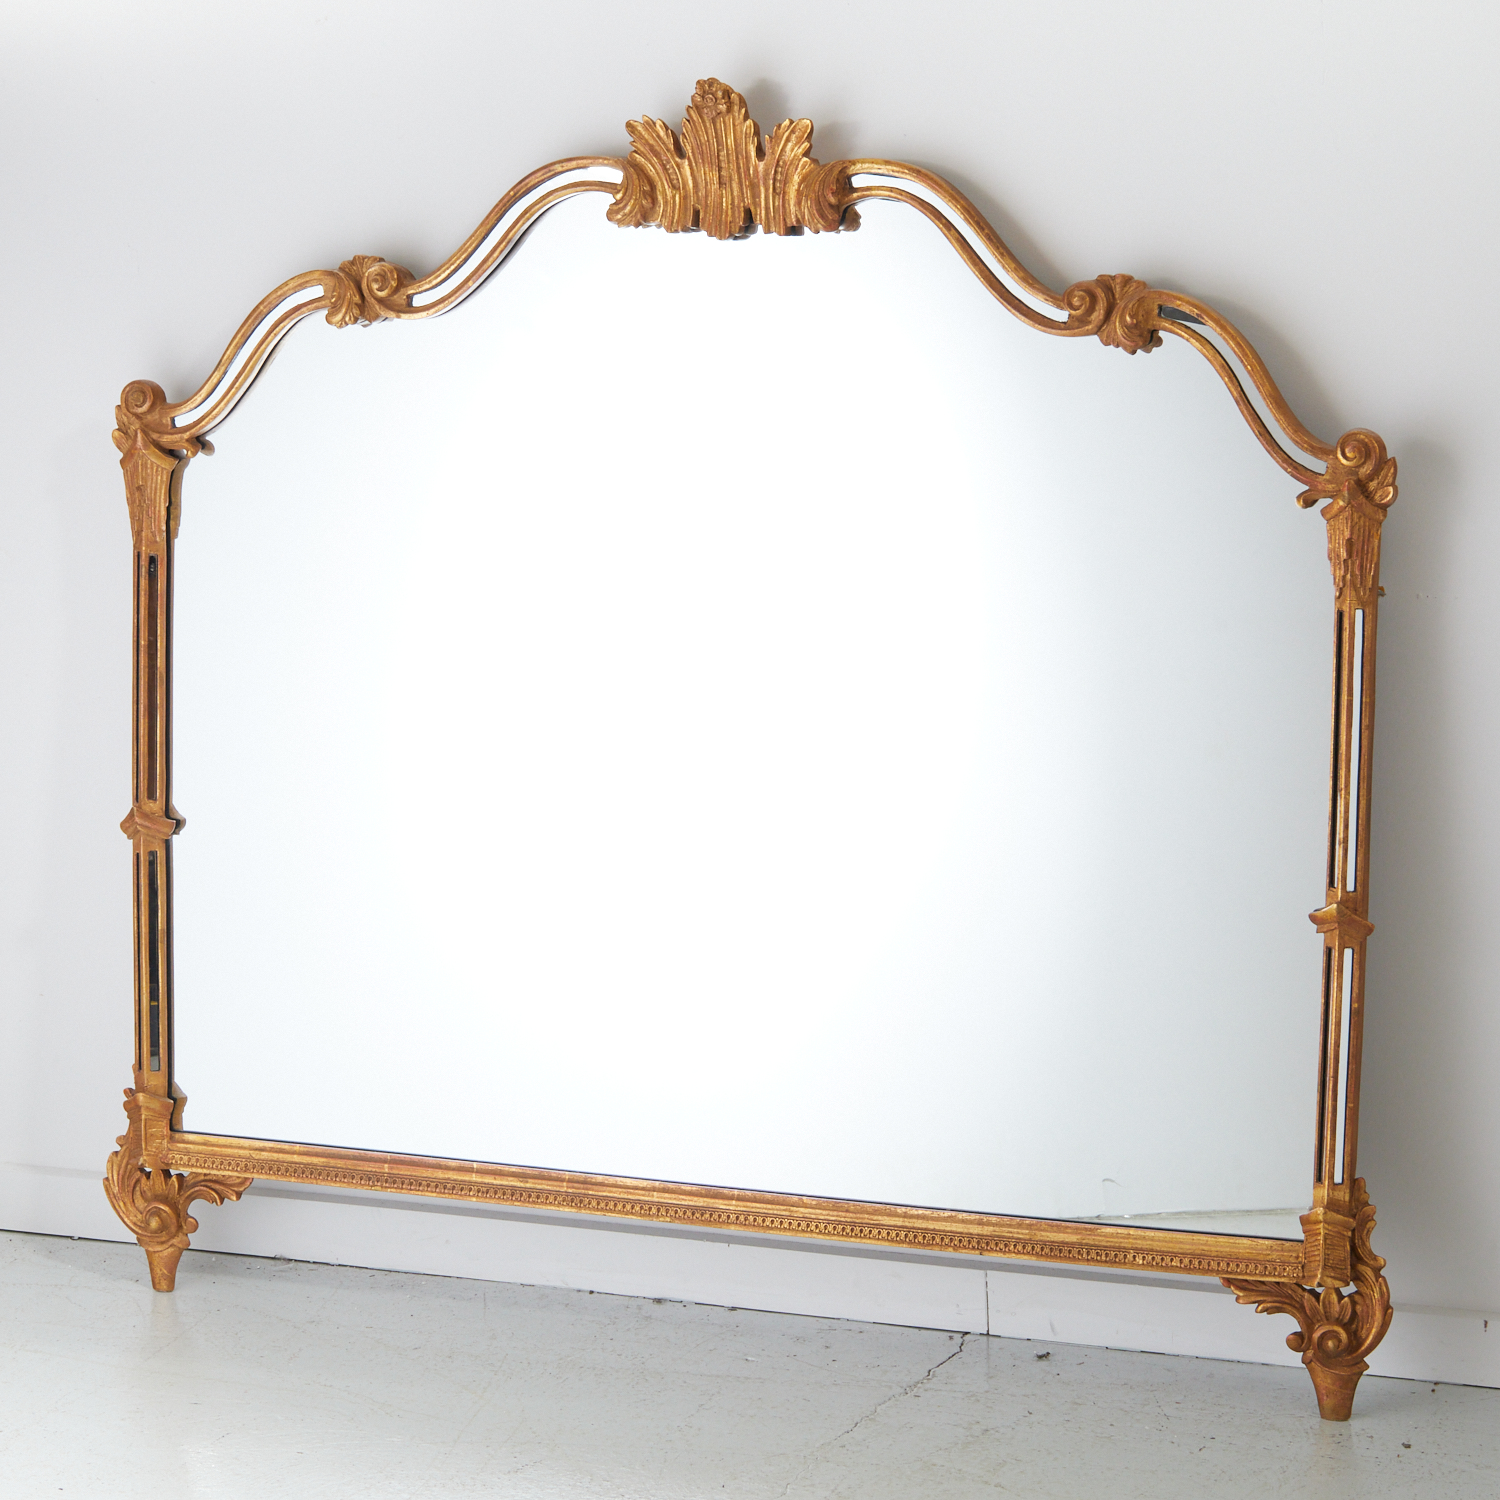 MIRROR FAIR NY CHINESE CHIPPENDALE 361318